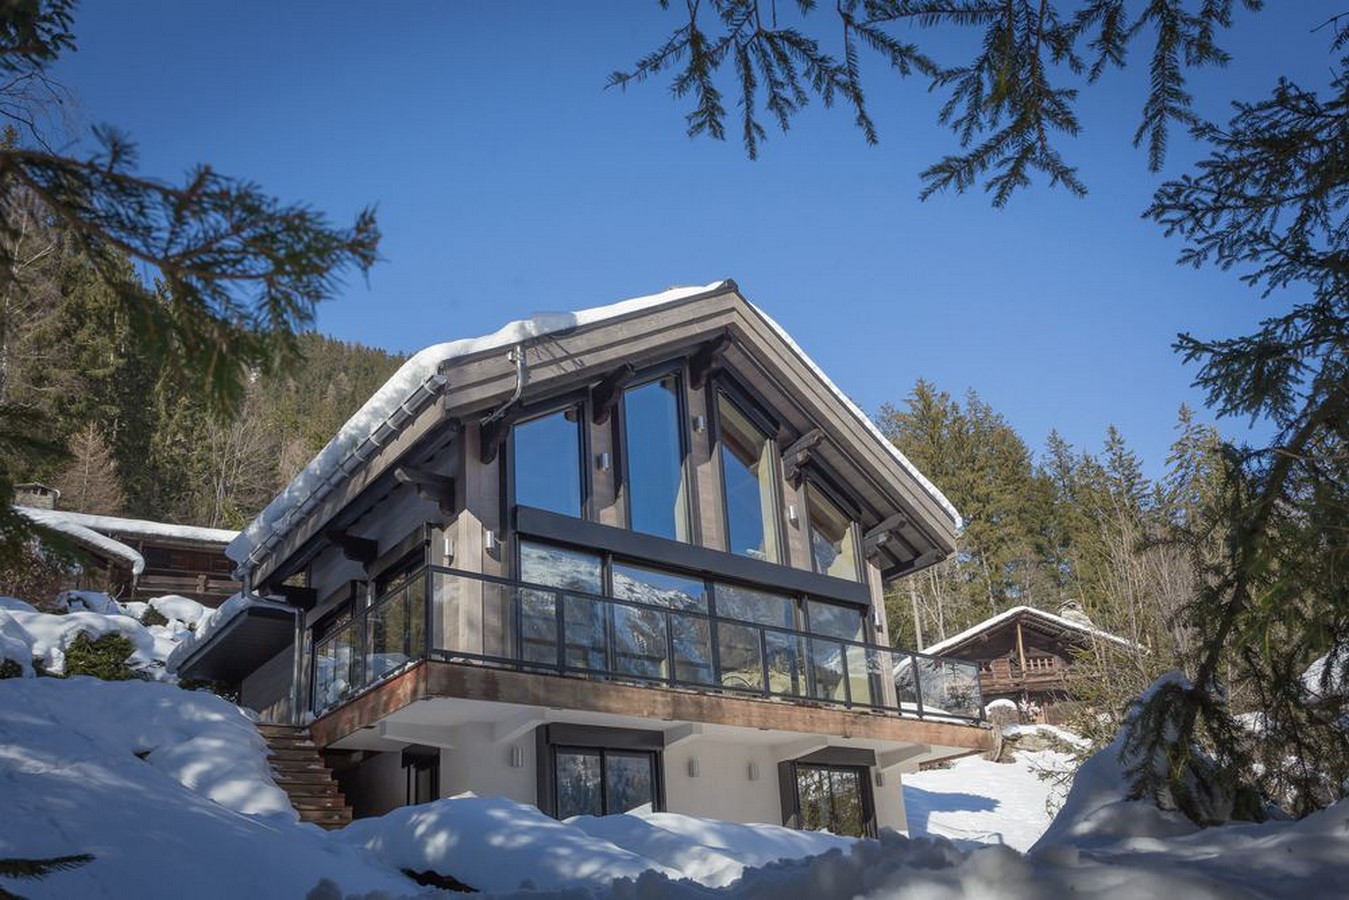 Swiss Chalet Style Timber Houses Of